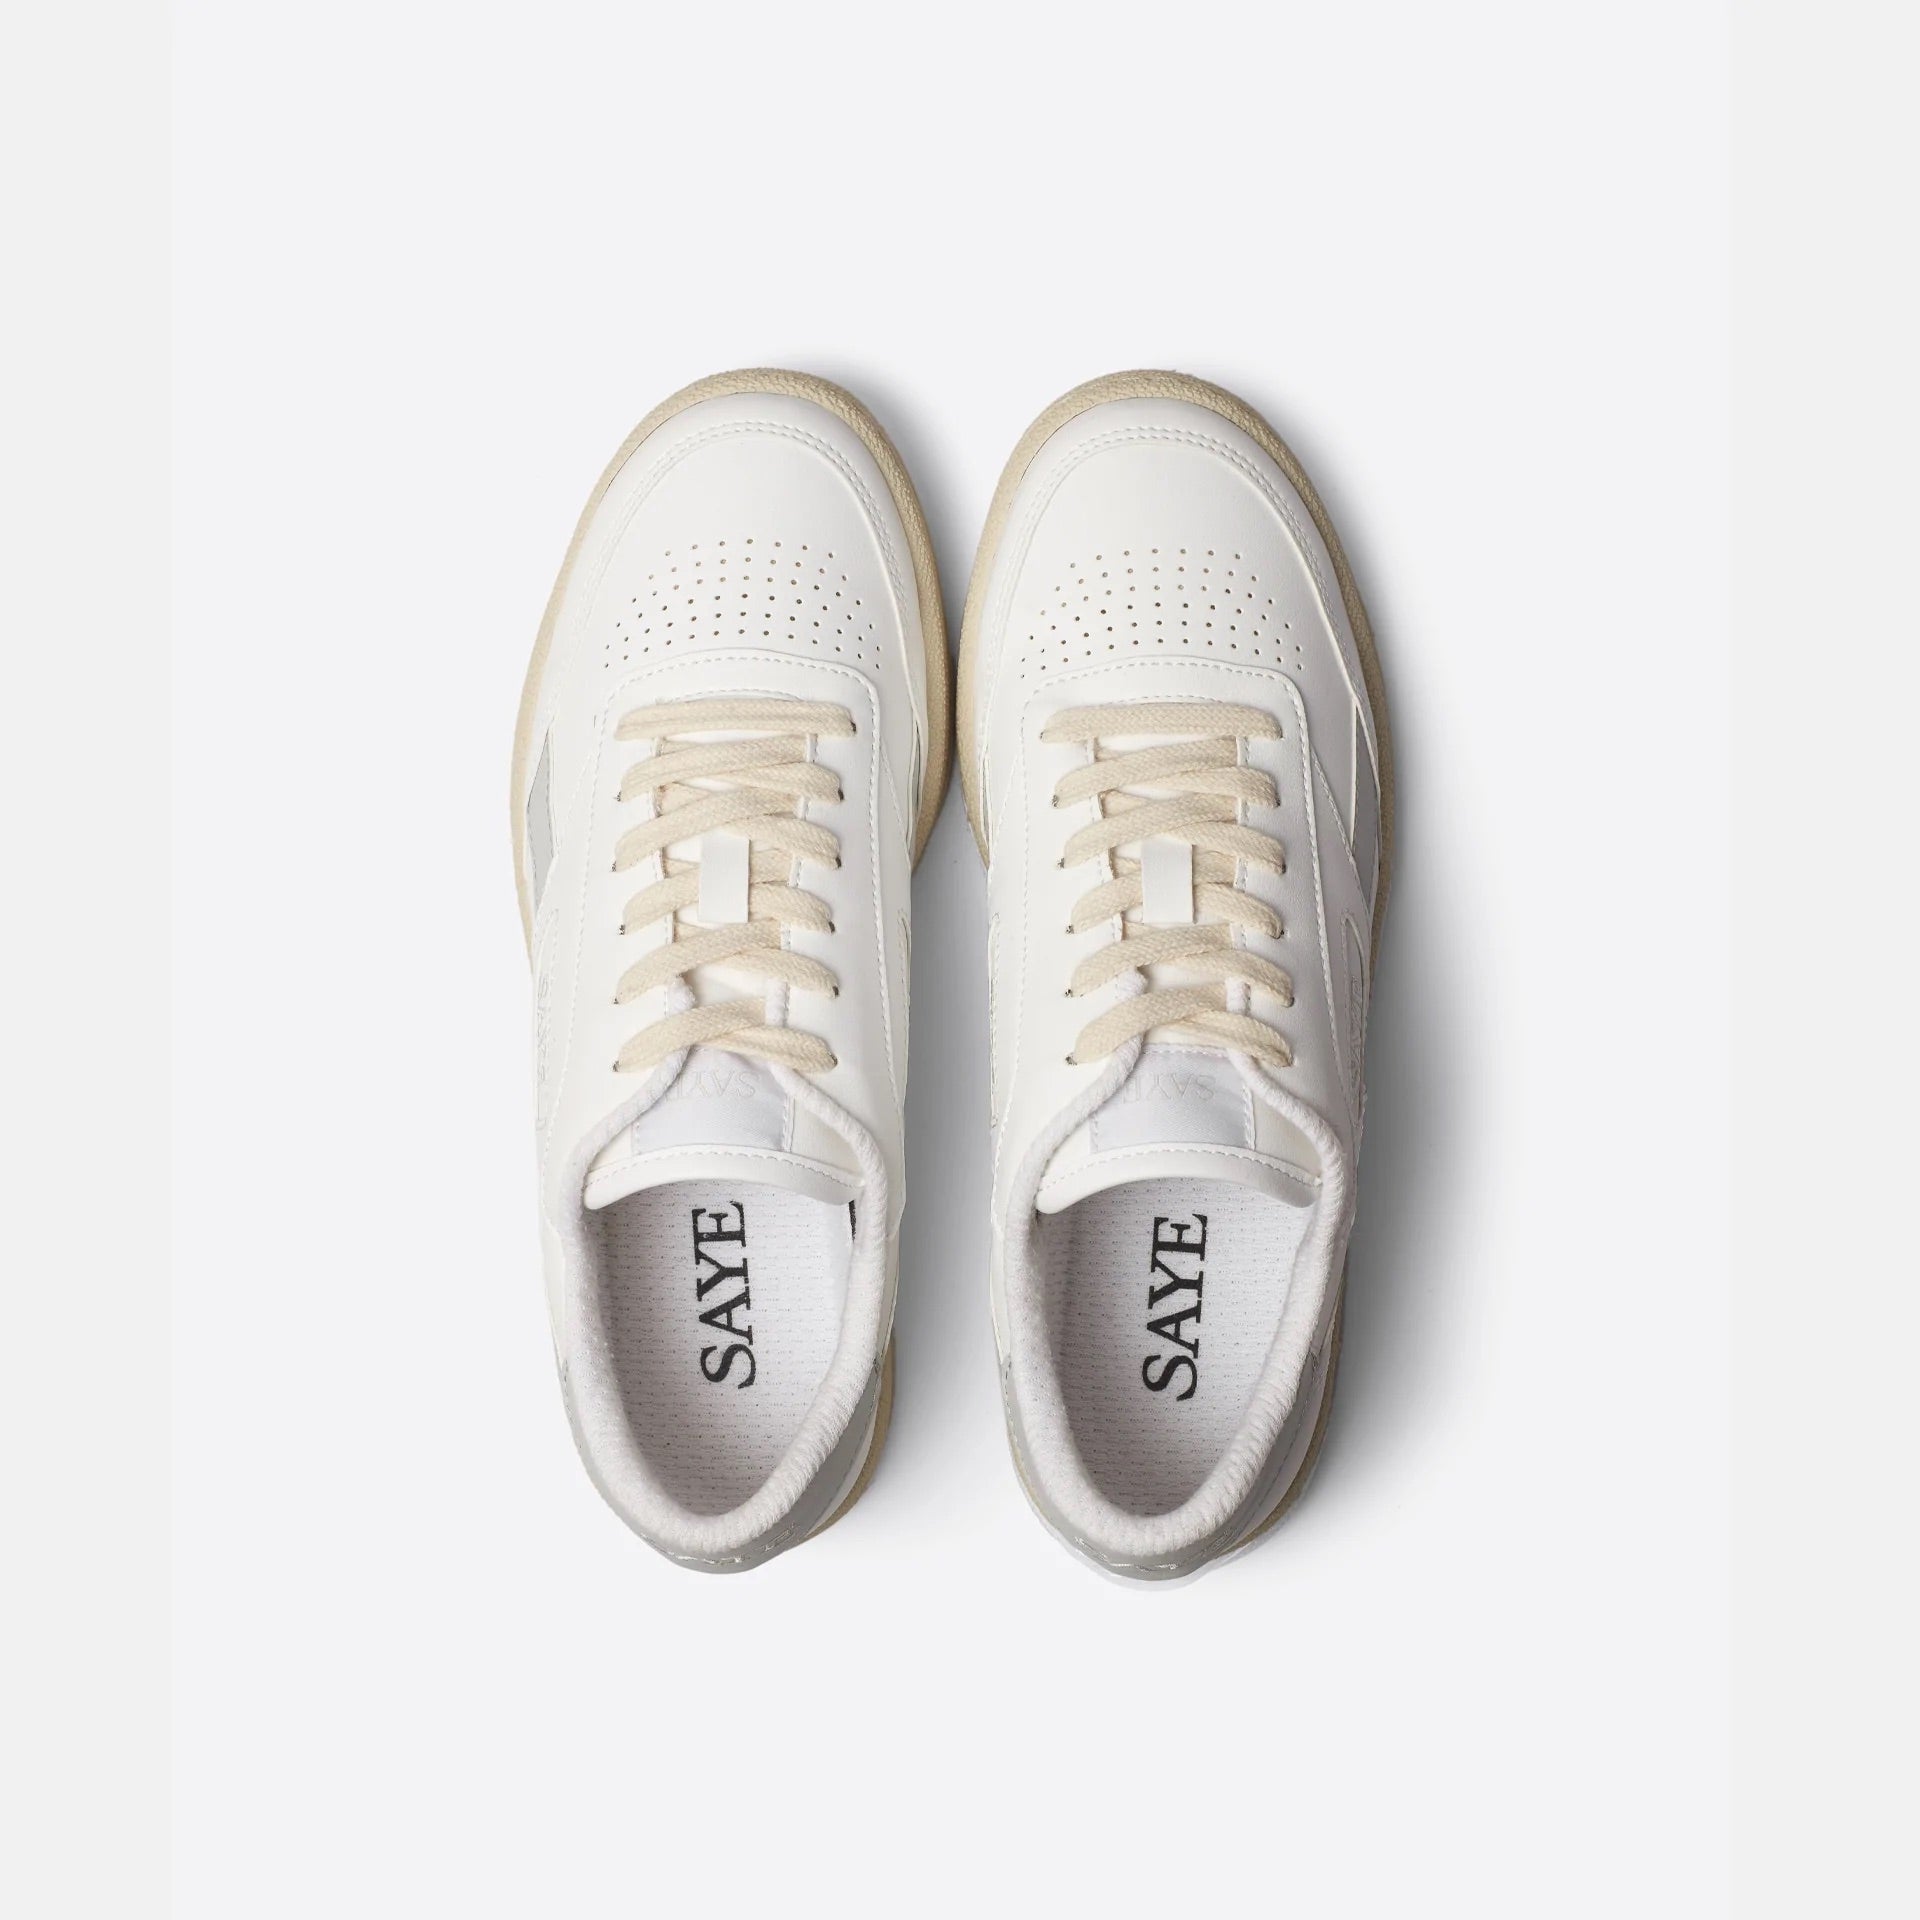 A pair of SAYE Modelo '89 Sneakers - Grey made from recycled materials on a white surface.